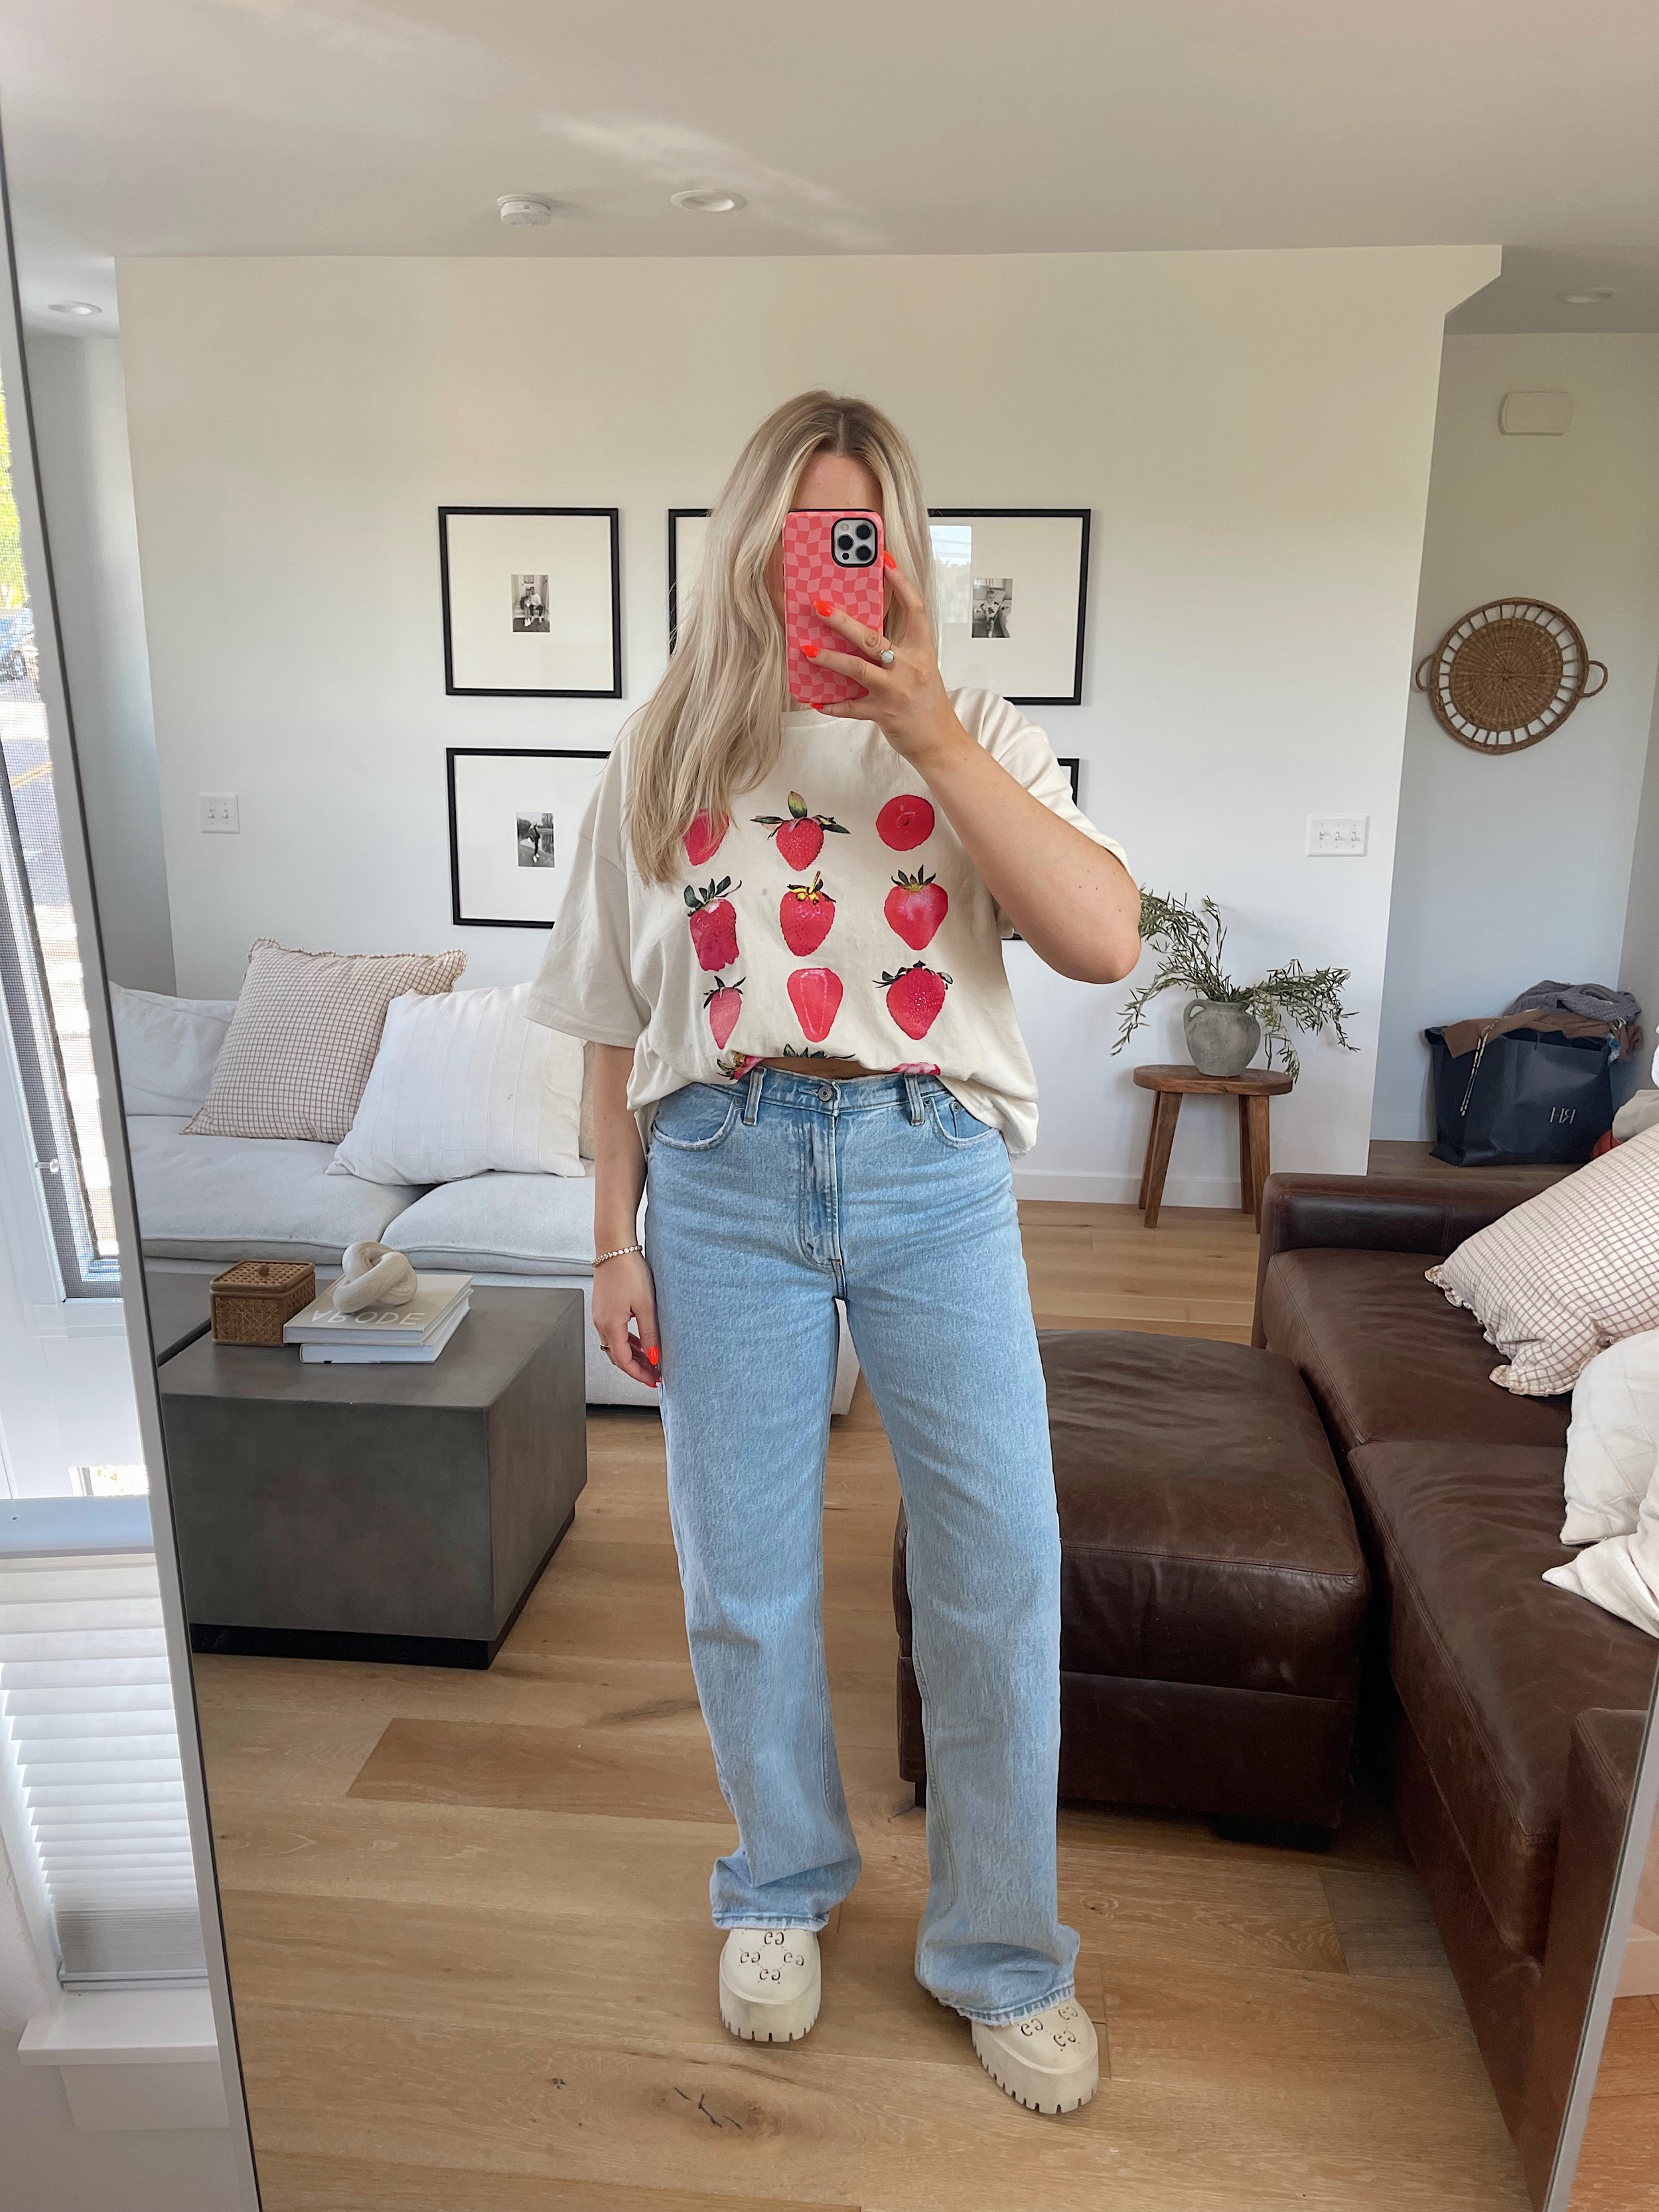 4th of July Outfit Inspiration - Strawberry Shirt.JPG